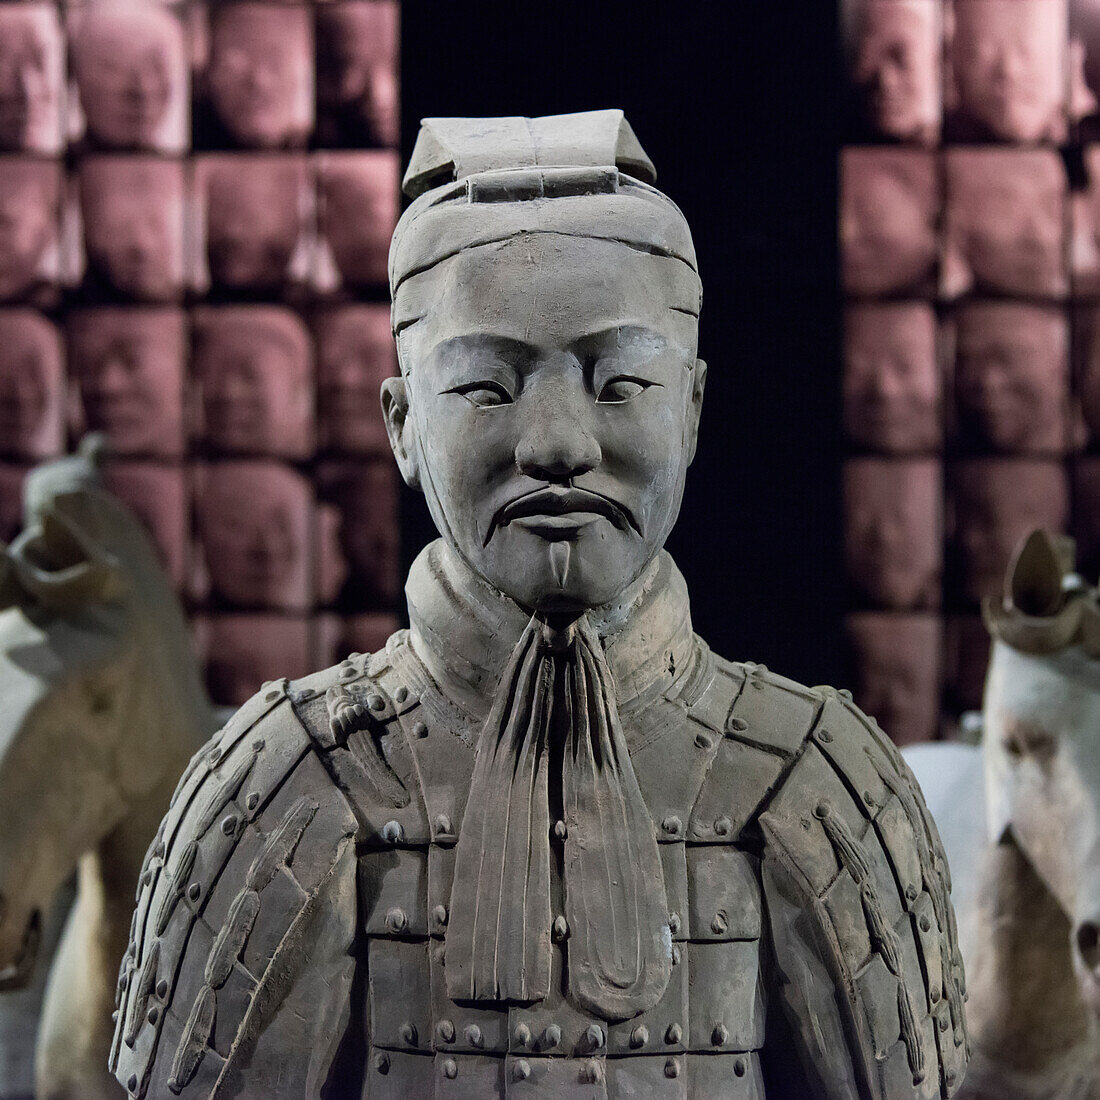 A Statue On Display At The Shaanxi History Museum; Xi'an, Shaanxi, China